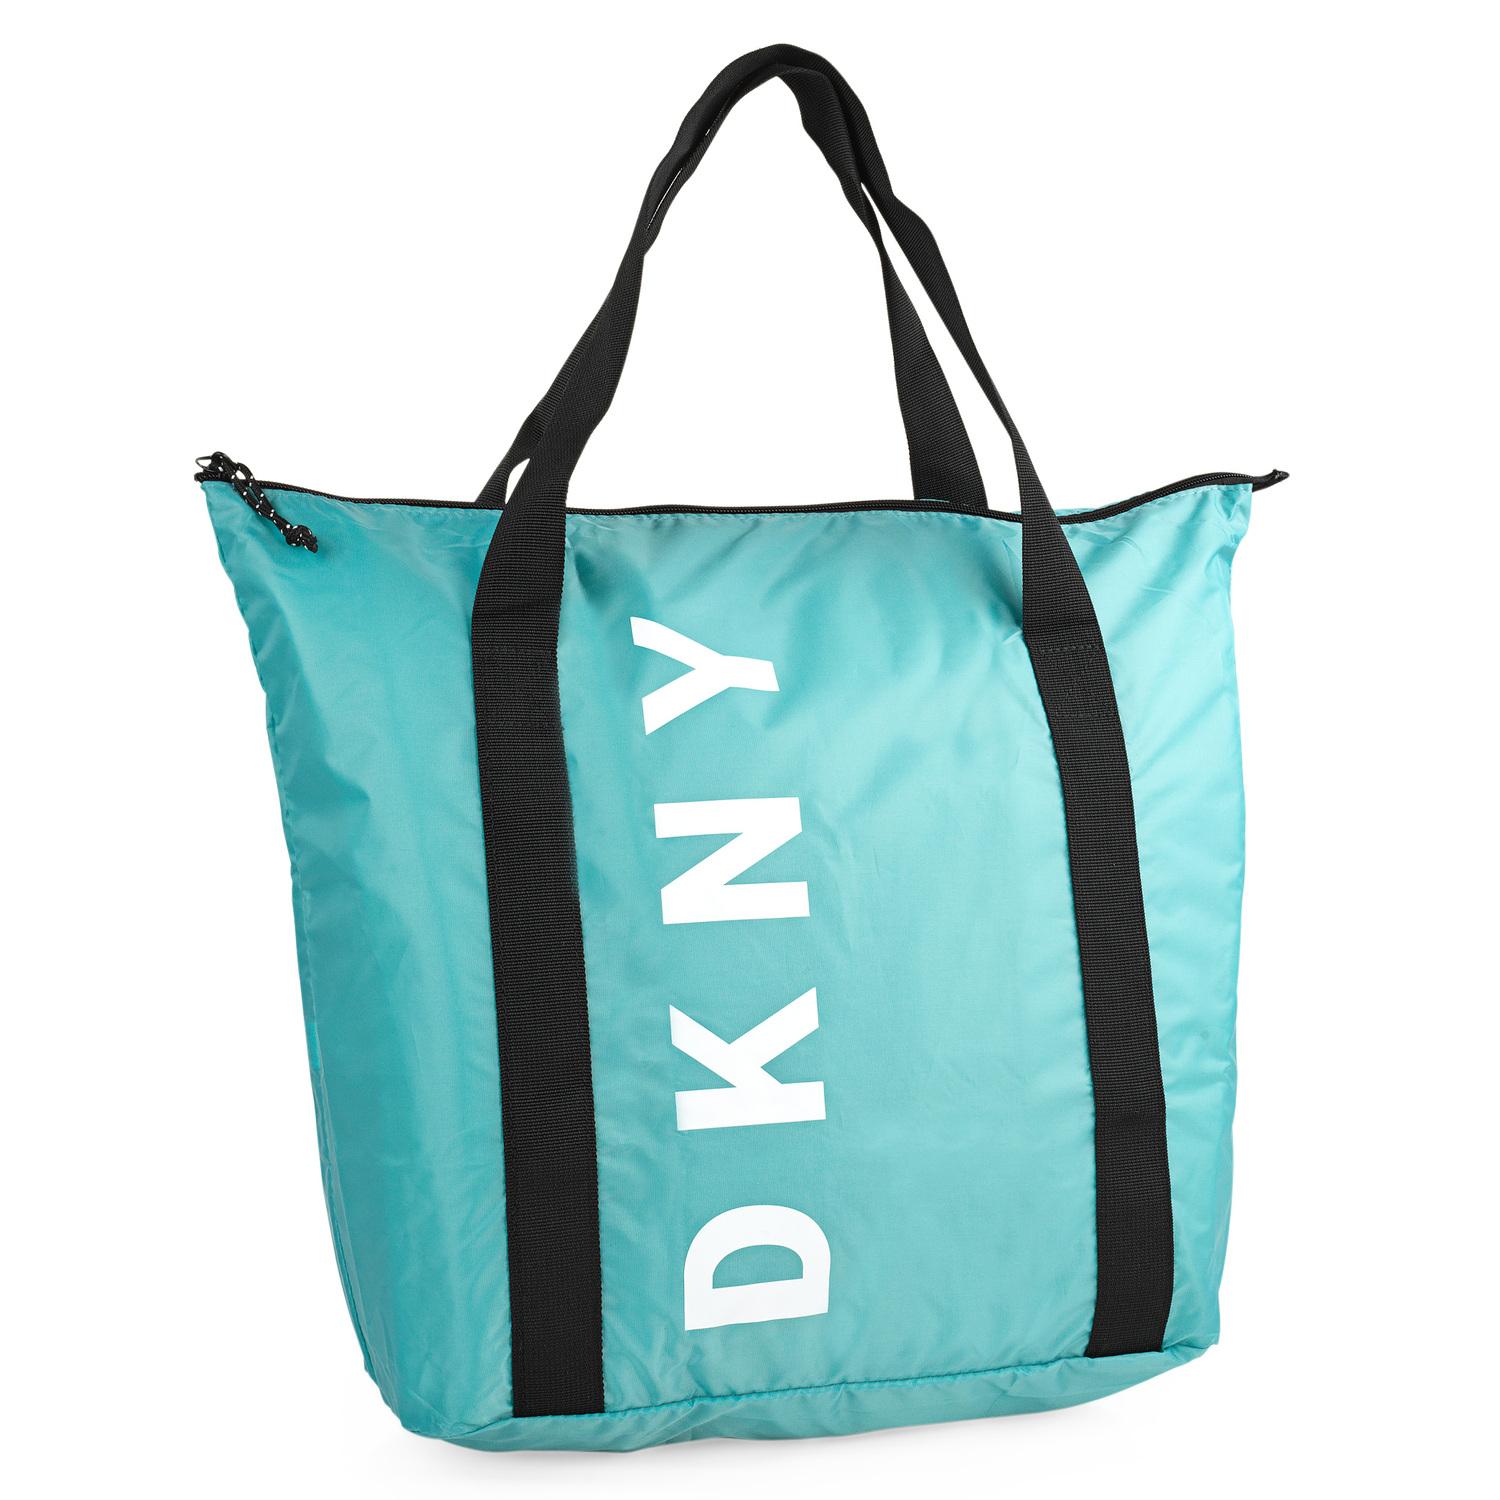 Dkny-928 Packable Tote Dkny Dkny-928 Packable